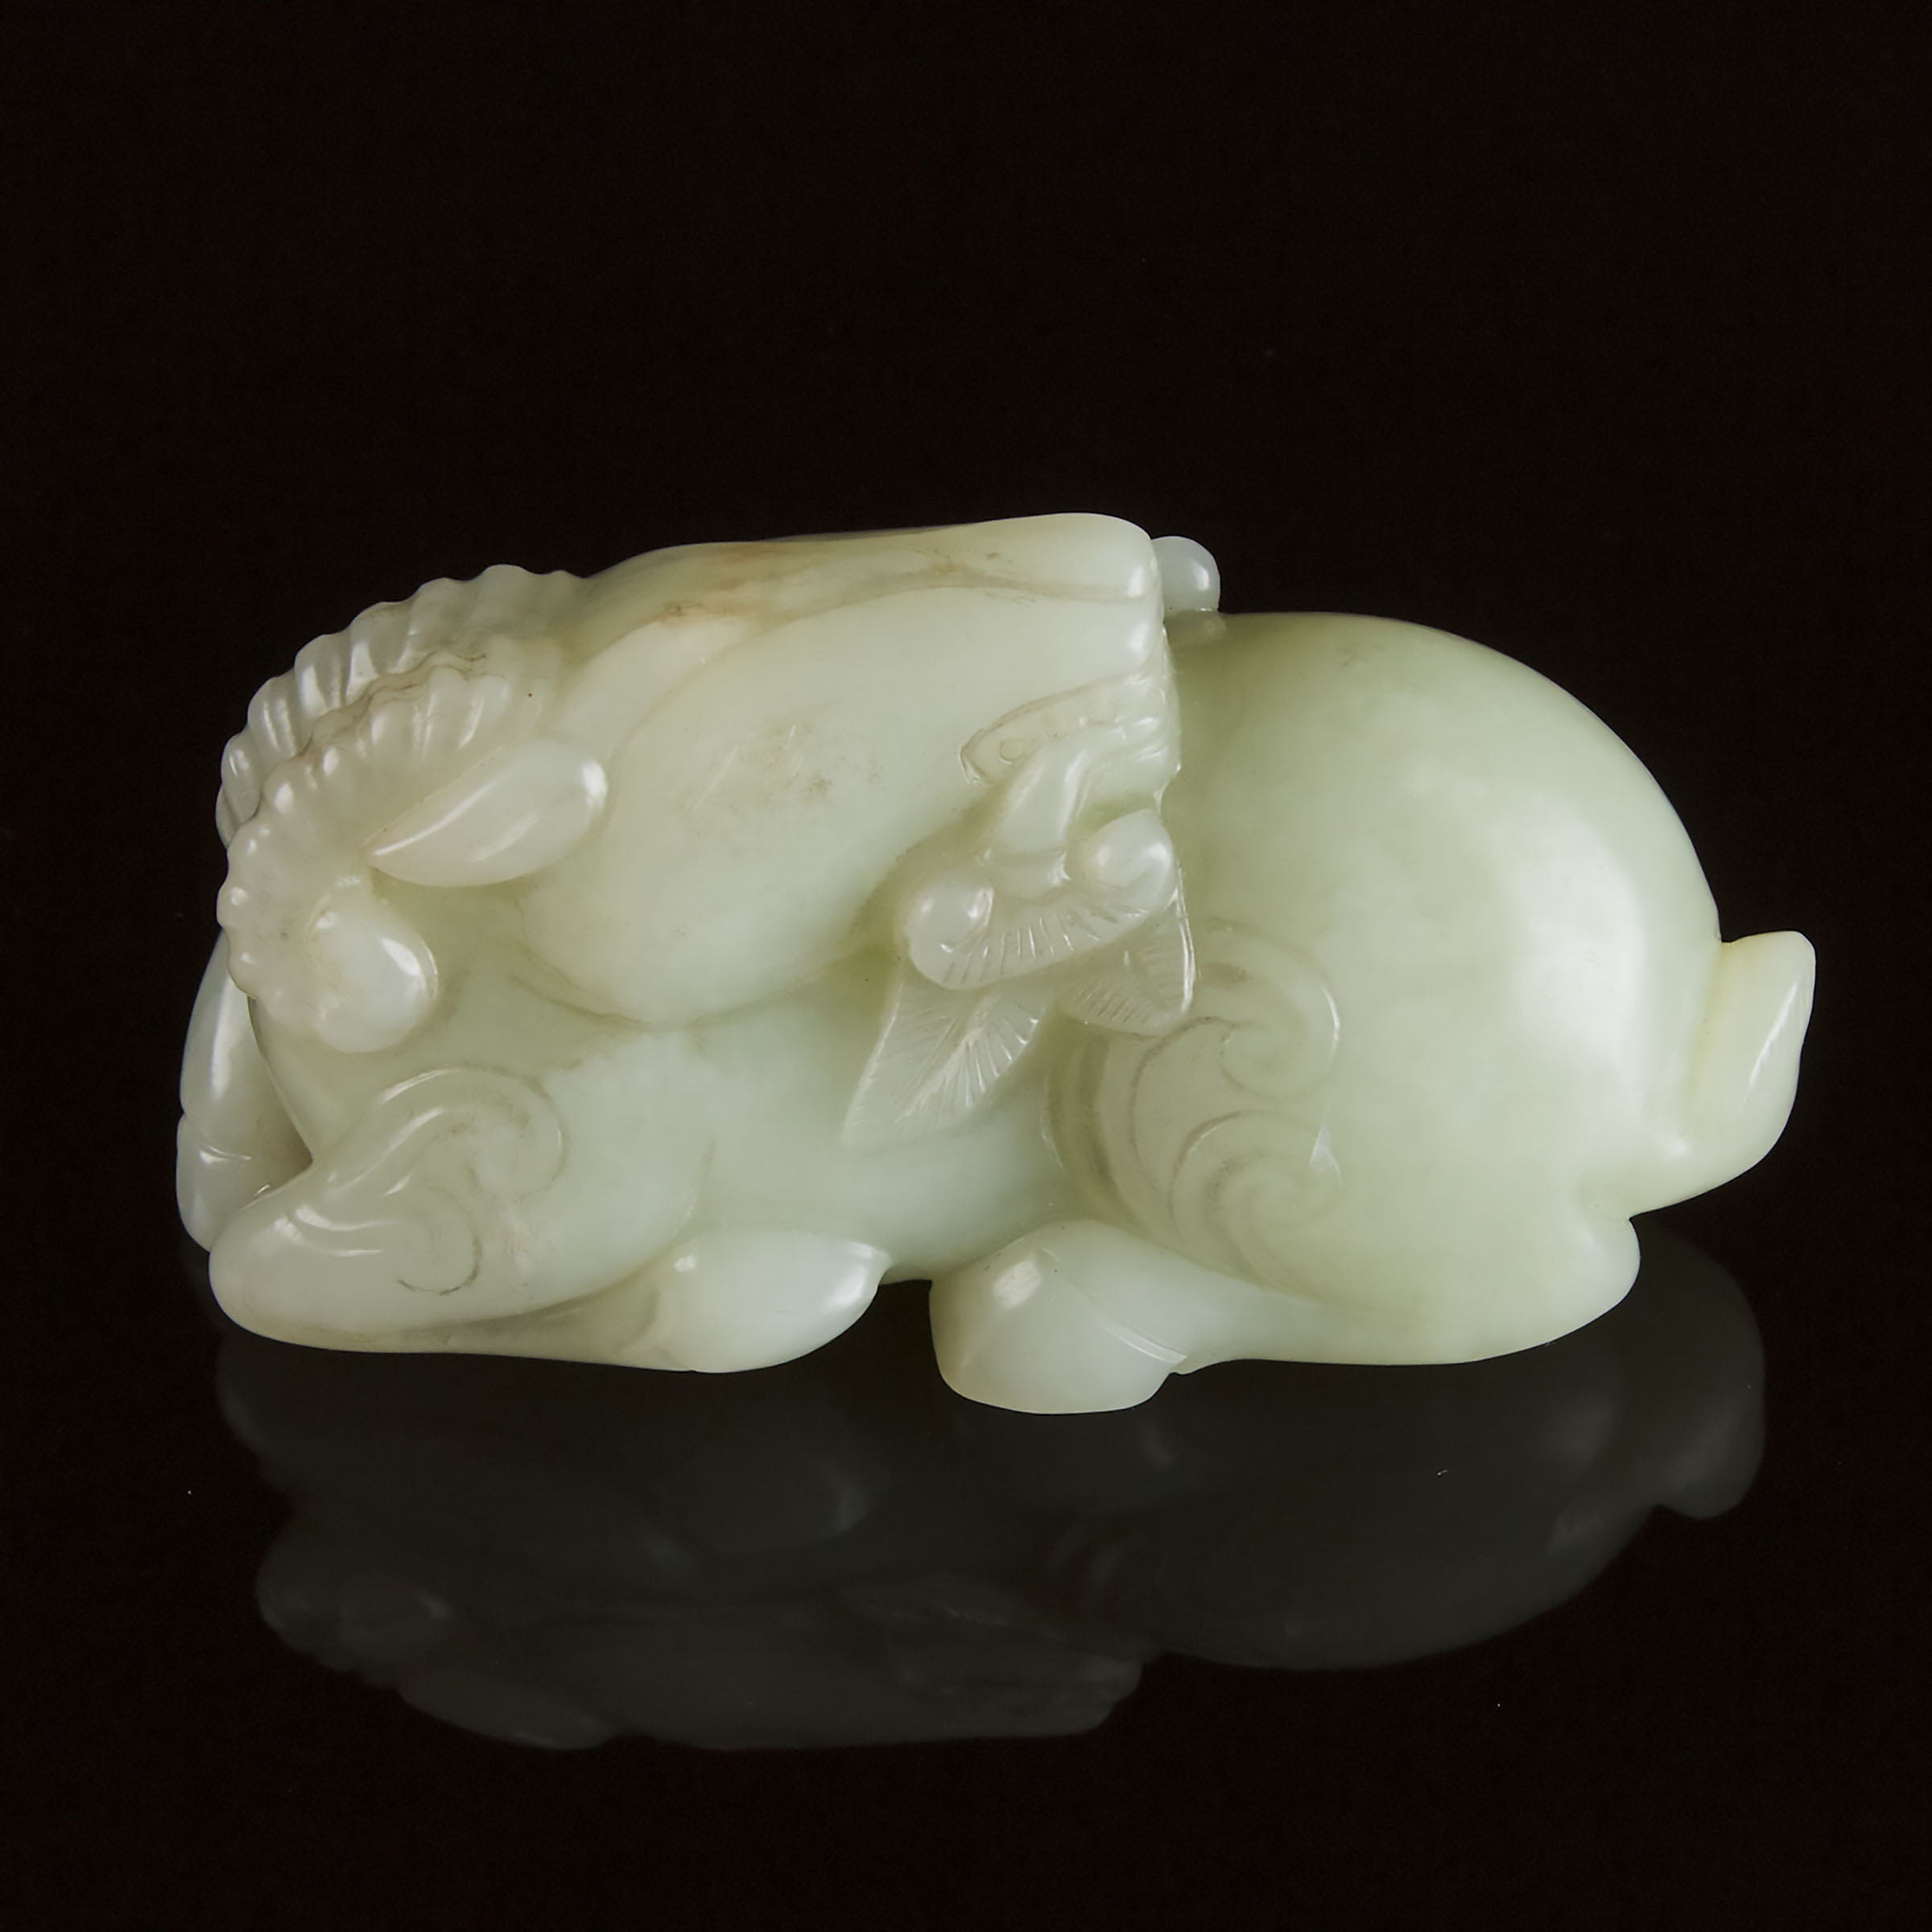 A Pale Celadon Jade Carving of a Ram